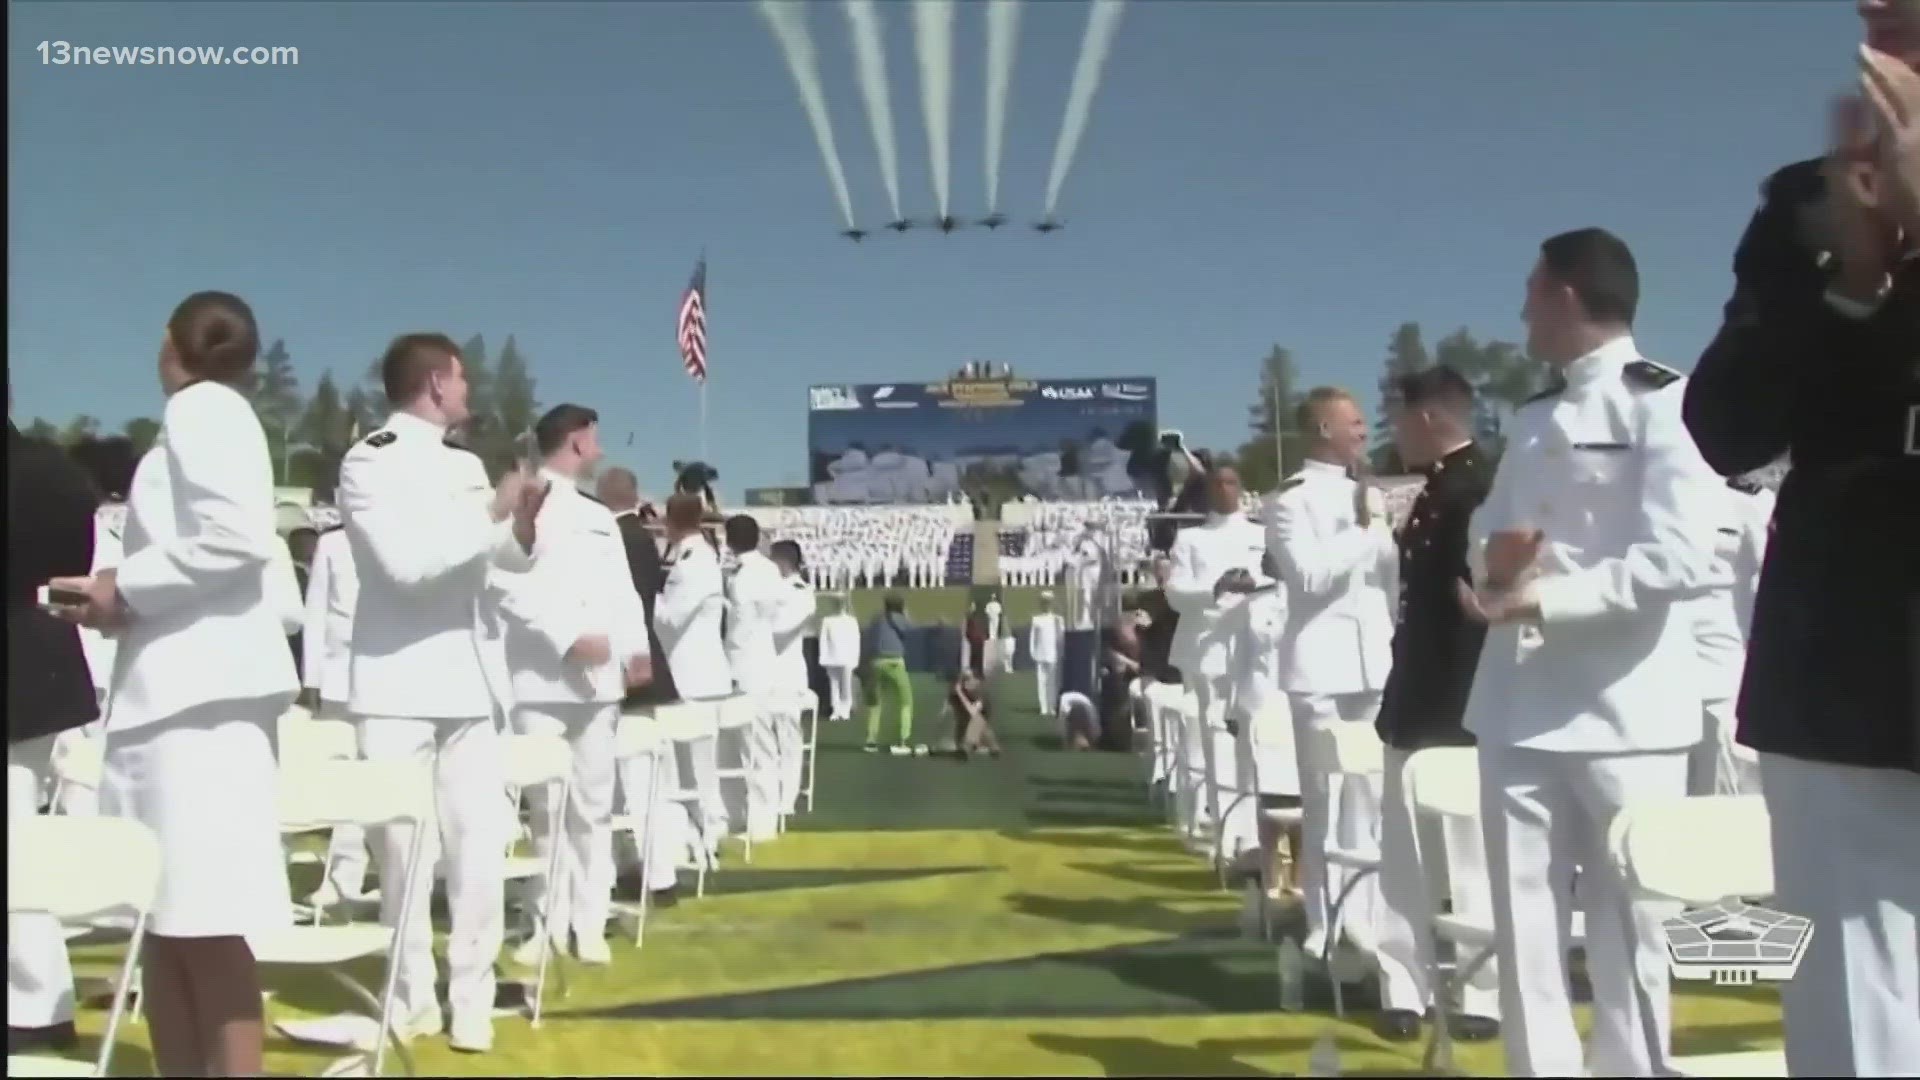 It was graduation day for 1,018 members of the United States Naval Academy, Class of 2023.